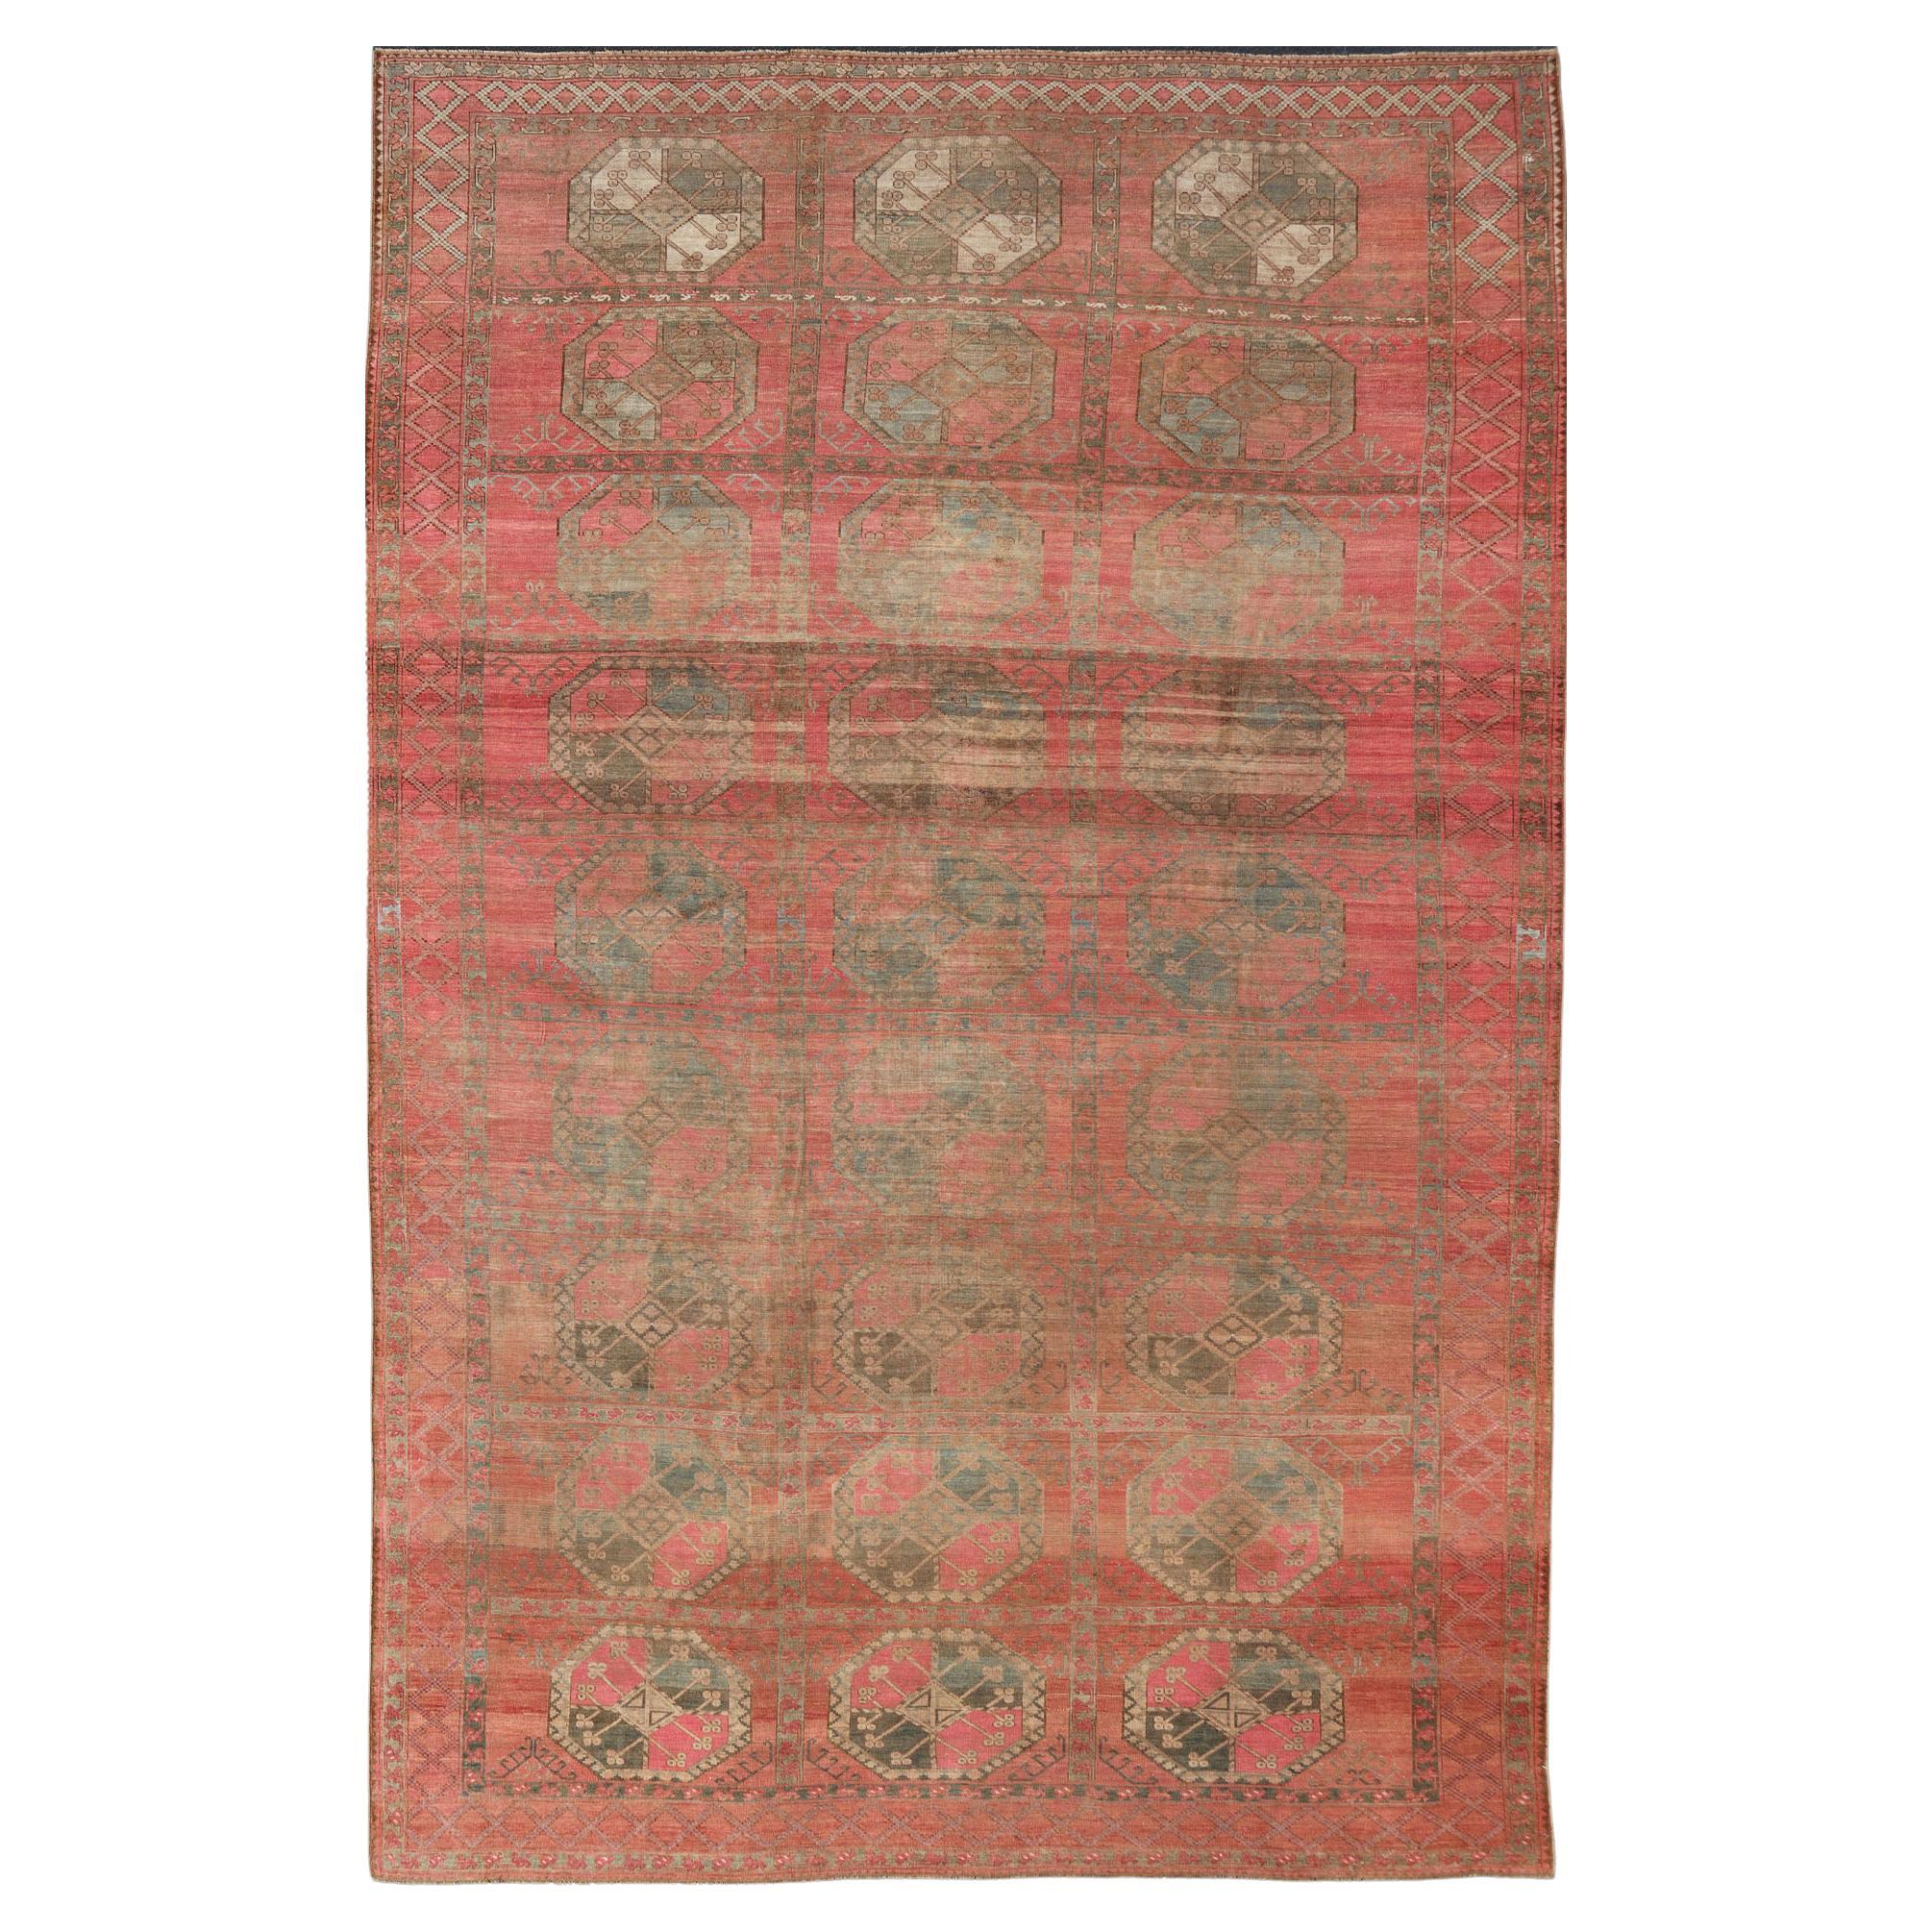 Large Turkomen Ersari Rug with All-Over Gul Design in Tan, Coral, and Brown